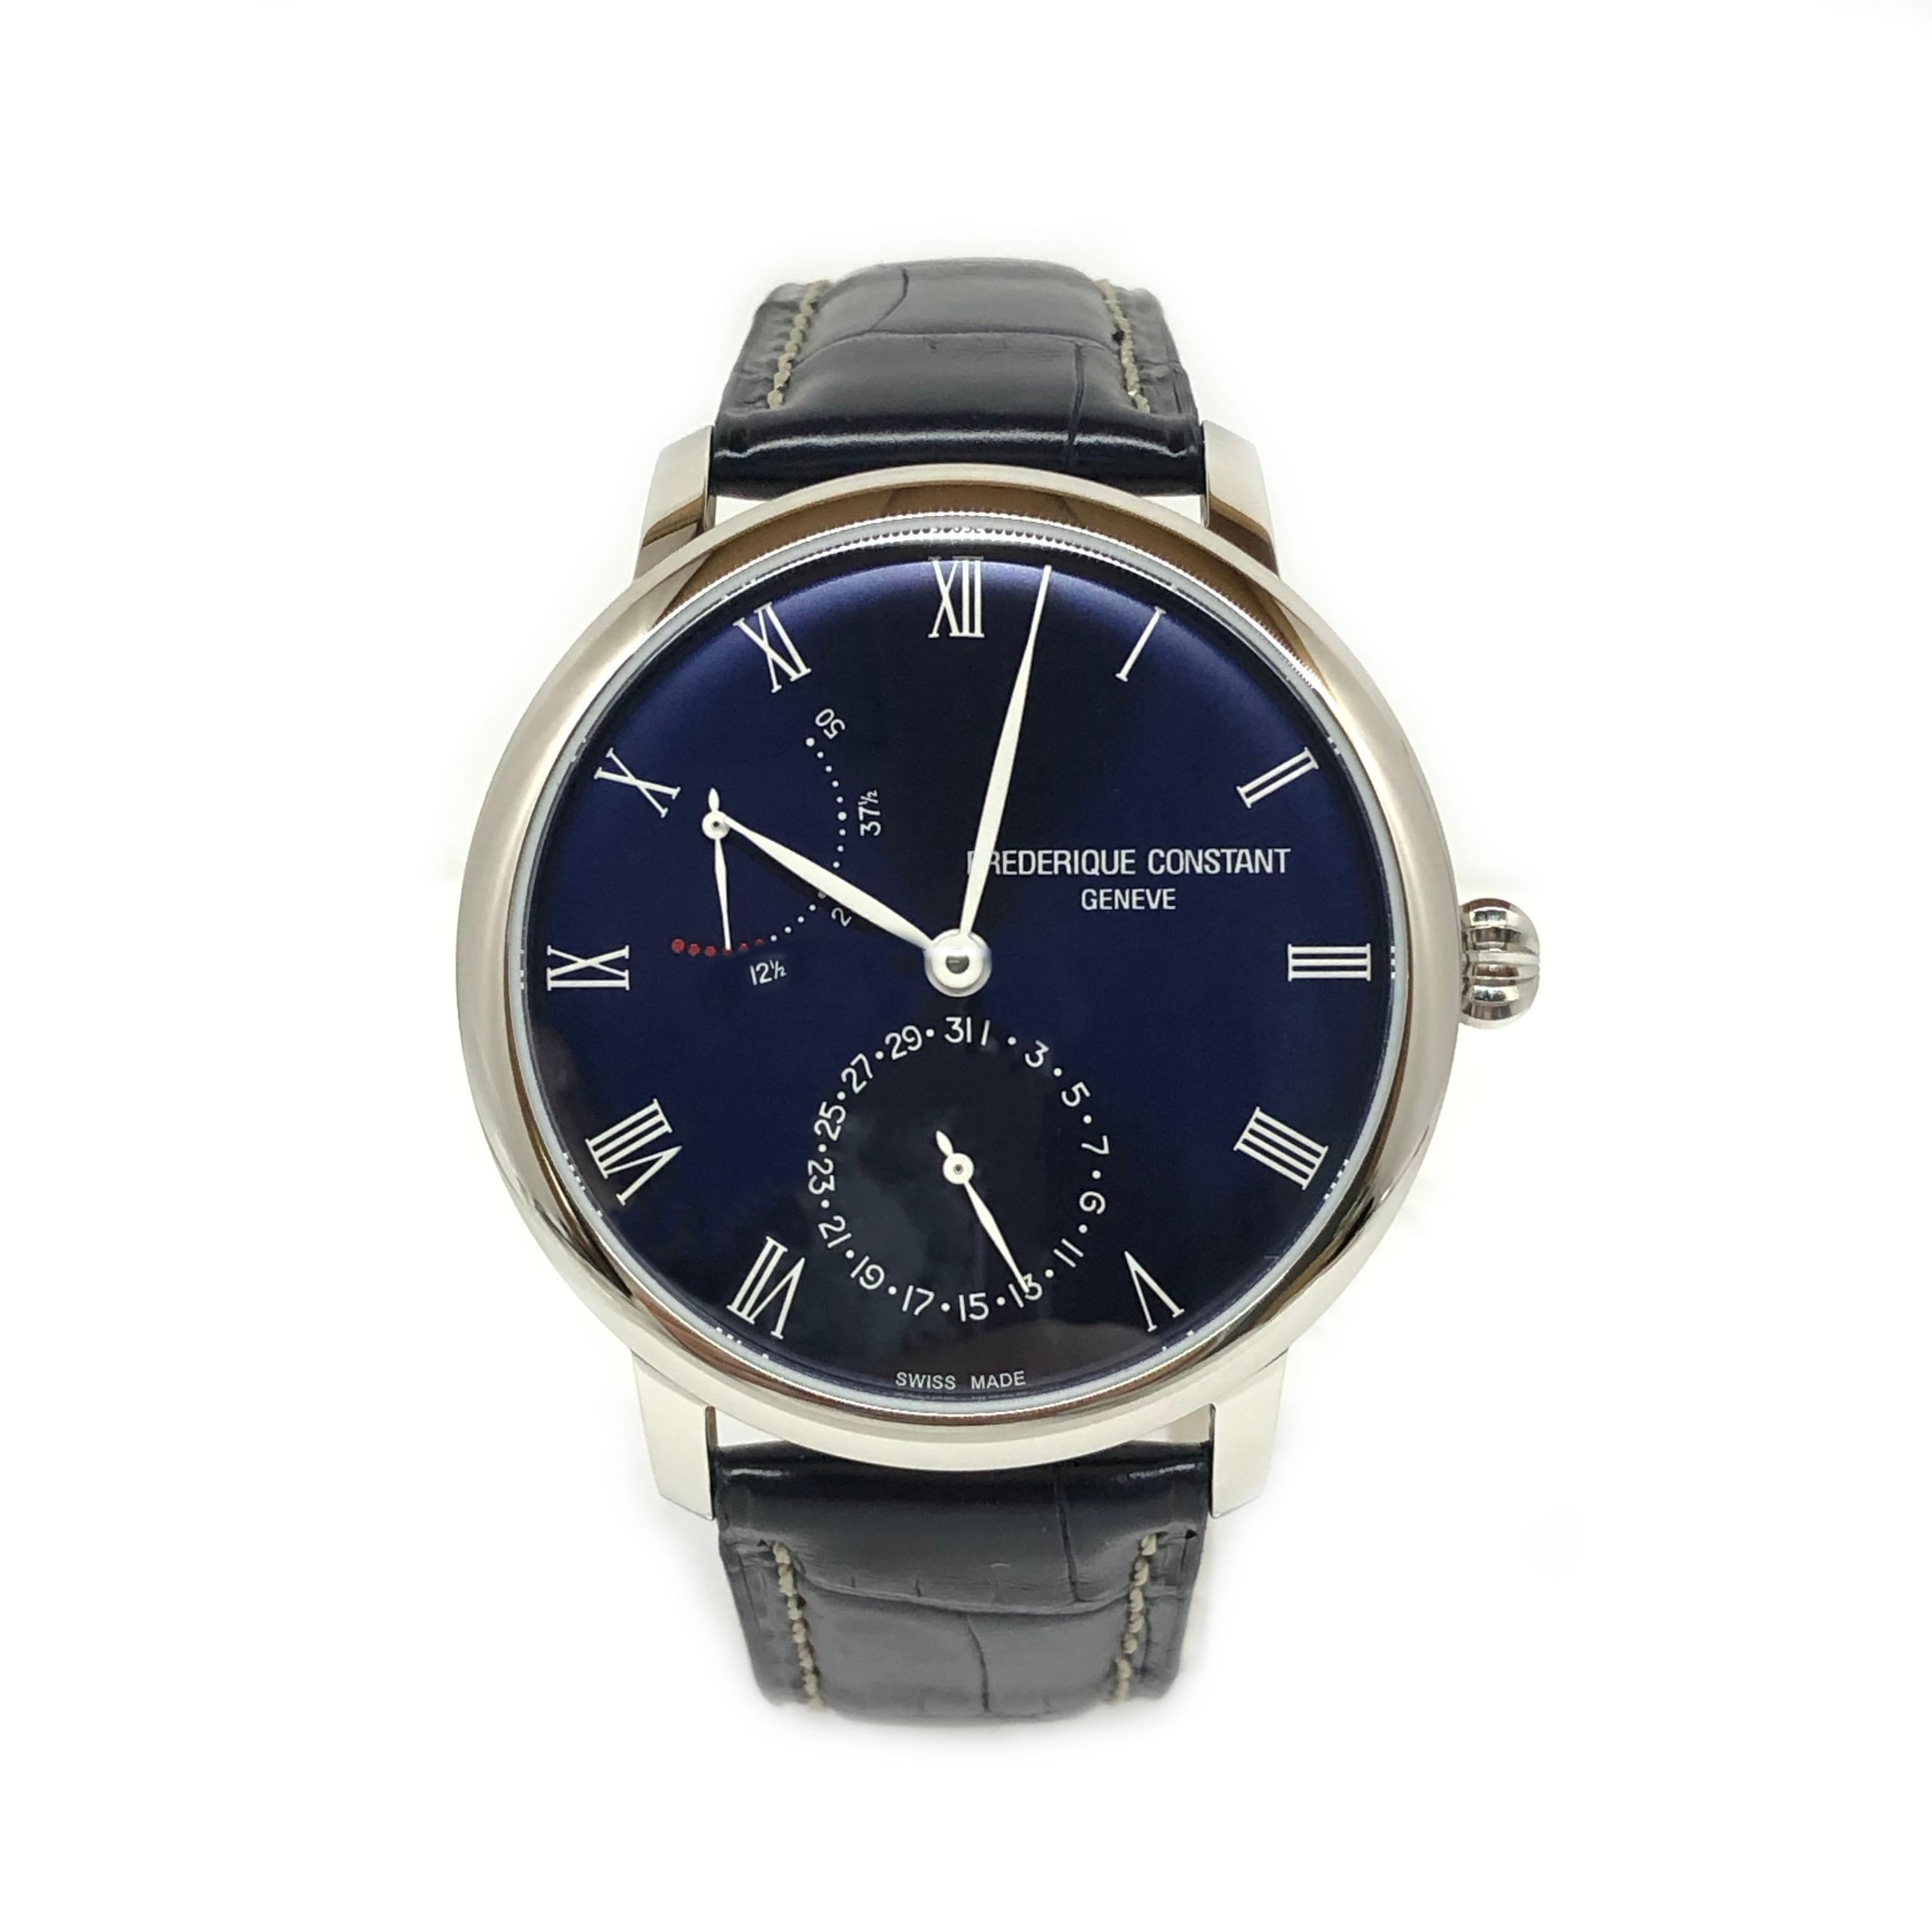 This Men’s watch has a 40 mm round stainless steel case with fixed bezel. Dark blue dial with and silver-tone leaf-style shape hands & Roman numerals hour markers. The date display at 6 o’clock and the power reserve indicator at 10 o’clock position.